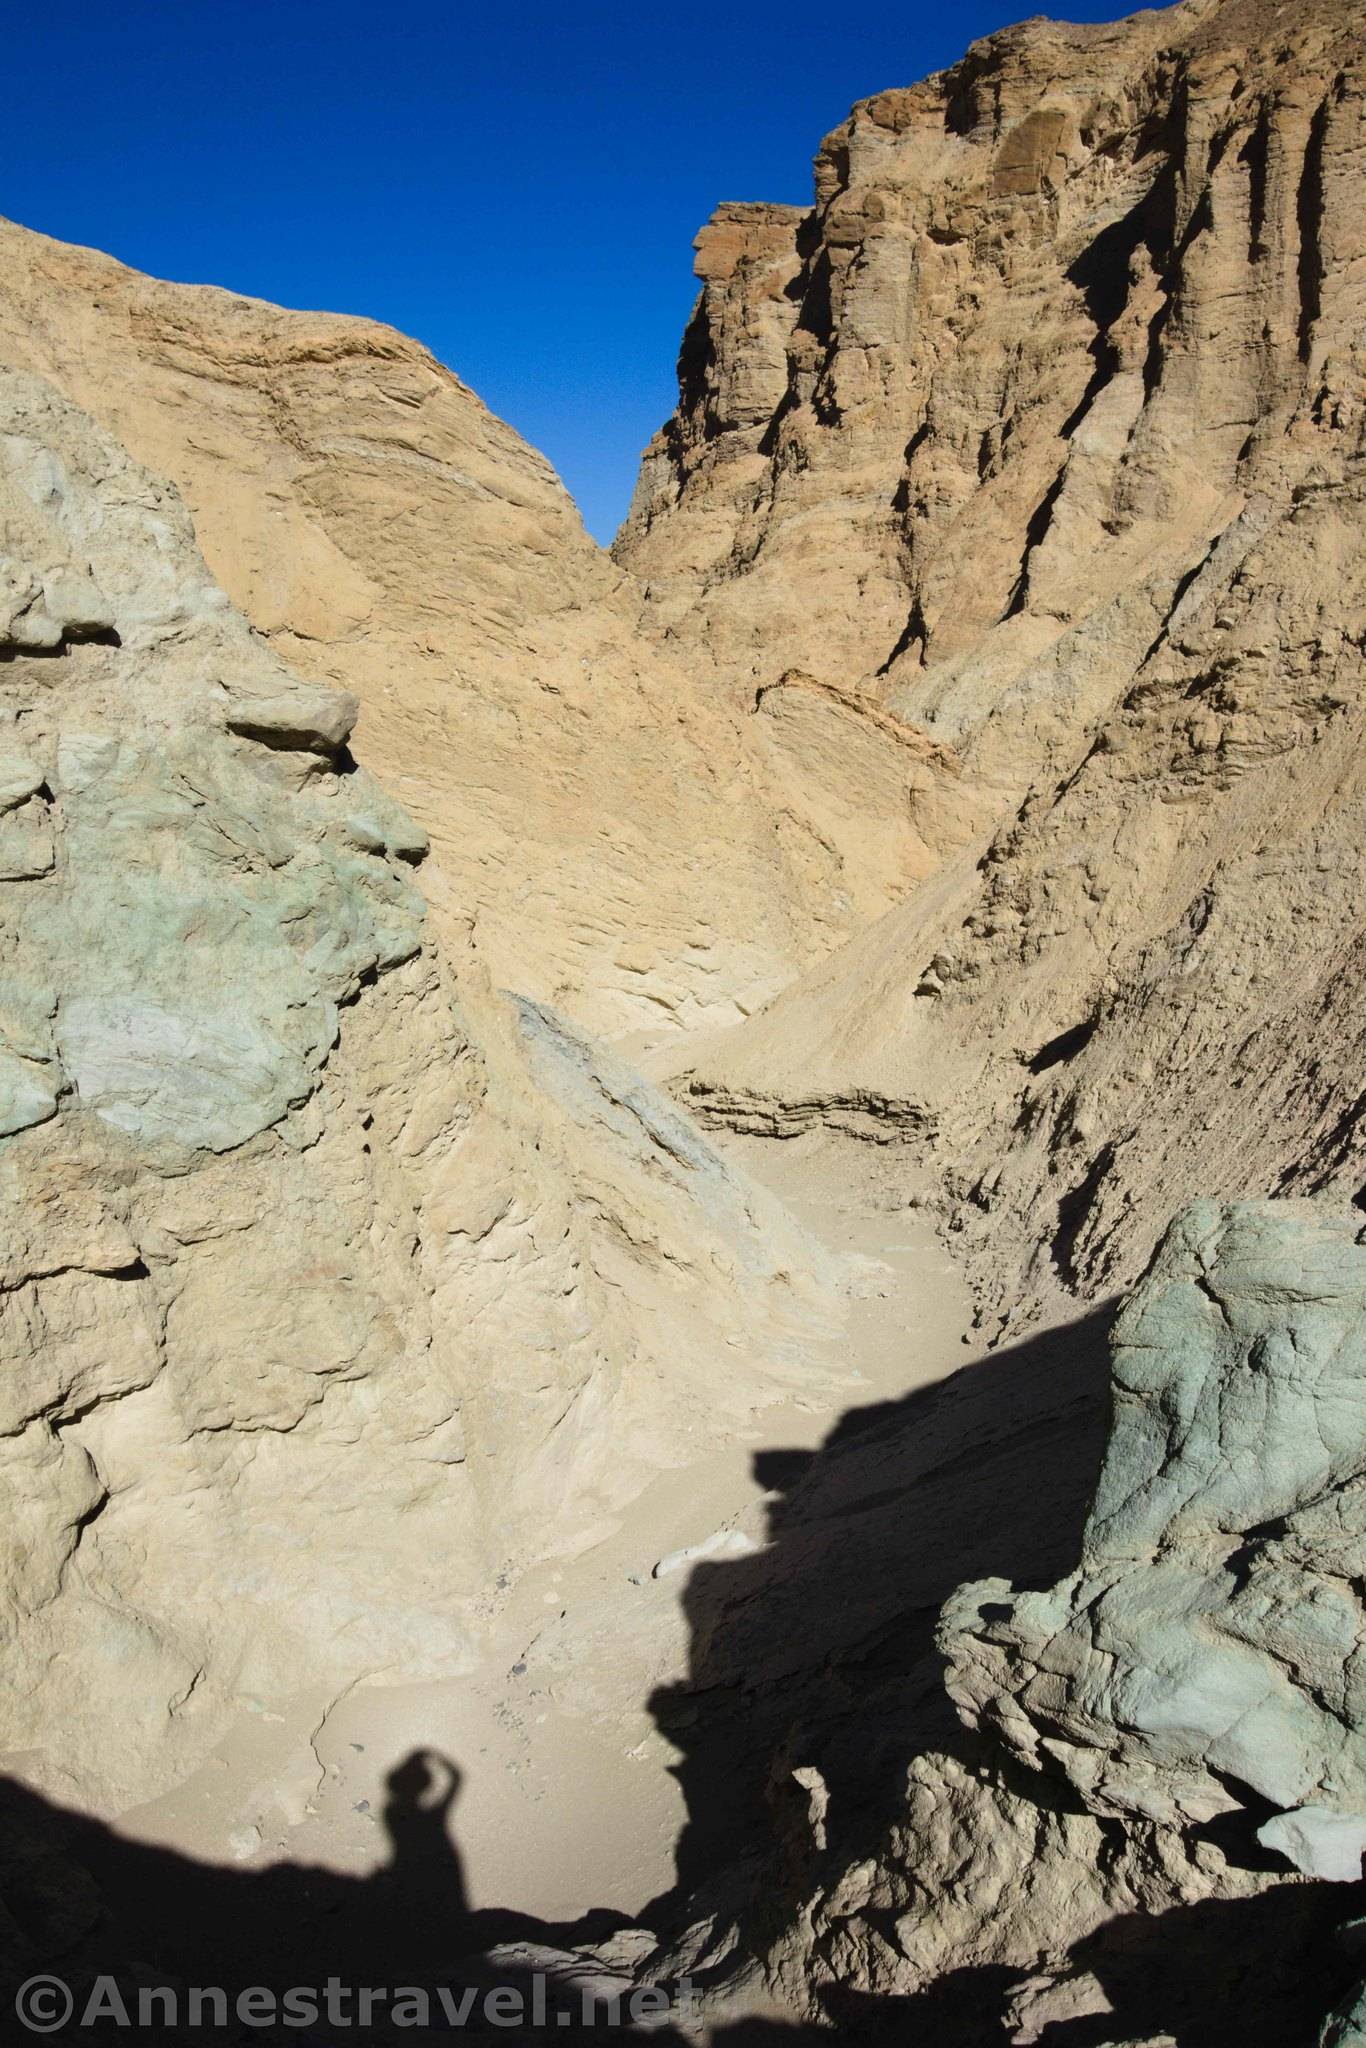 Above the 4th dryfall in 20 Mule Team Canyon, Death Valley National Park, California